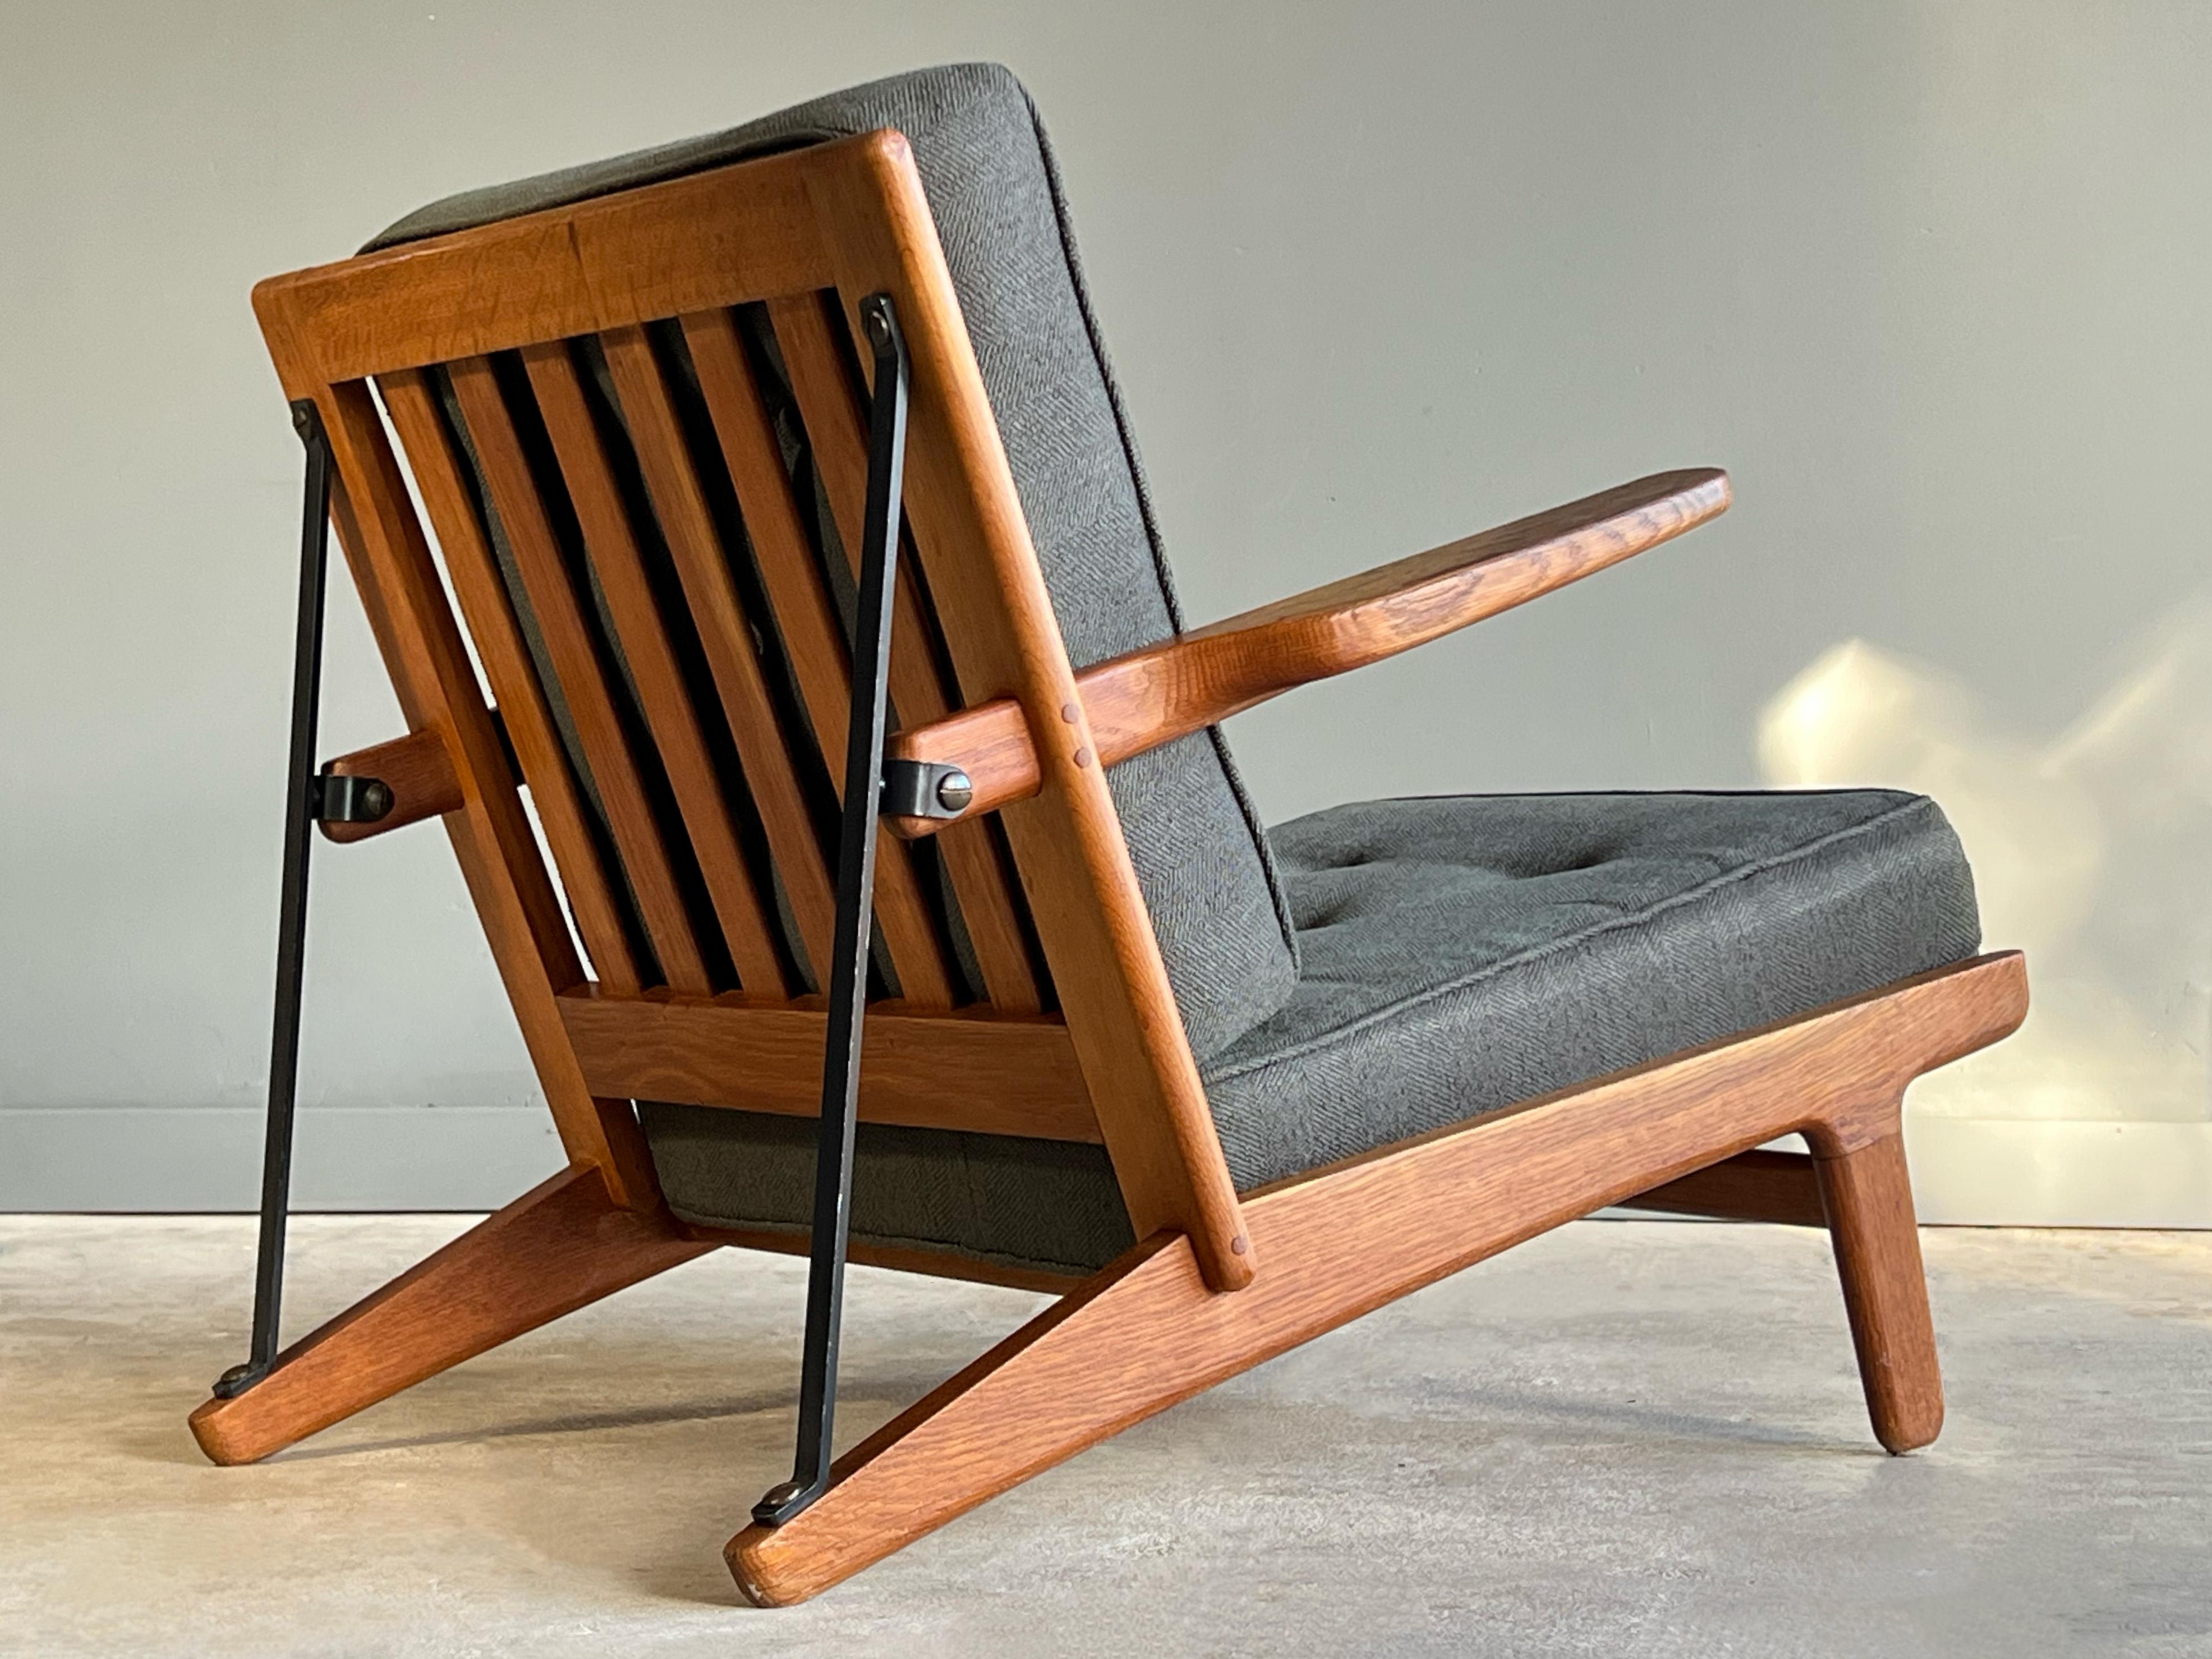 Very rare and early ‘easy chair’ designed by Børge Mogensen and produced by Andreas Graversen/Fredericia Furniture. 

Executed in quarter sawn oak, iron, brass and original wool cushions. Model 240-11 was designed in 1954 and is almost never